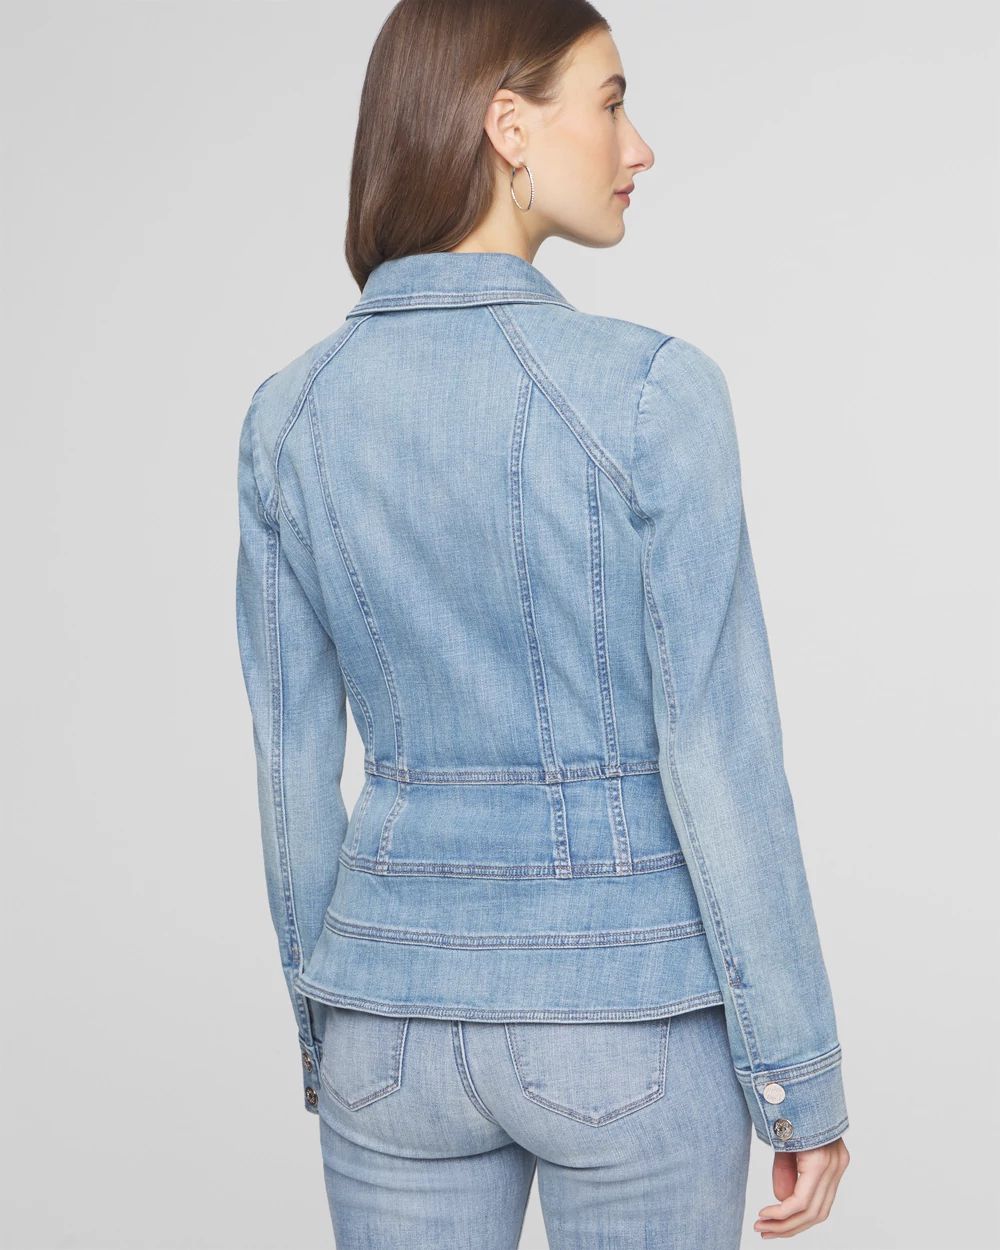 Seamed Denim Jacket click to view larger image.